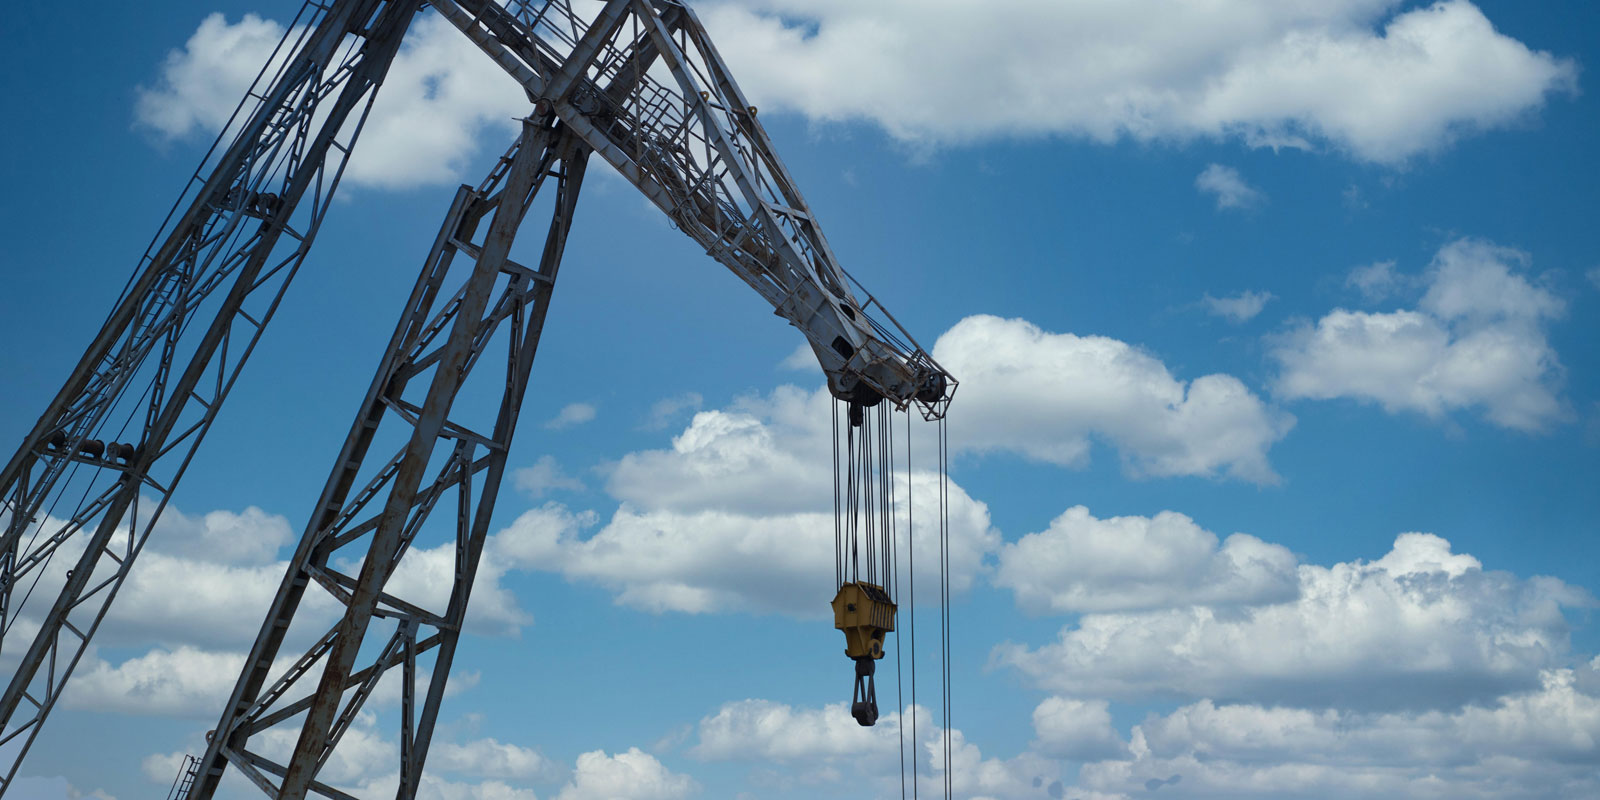 Level-2-NVQ-Diploma-in-Plant-Operations-(Construction)-Cranes-and-Specialist-Lifting